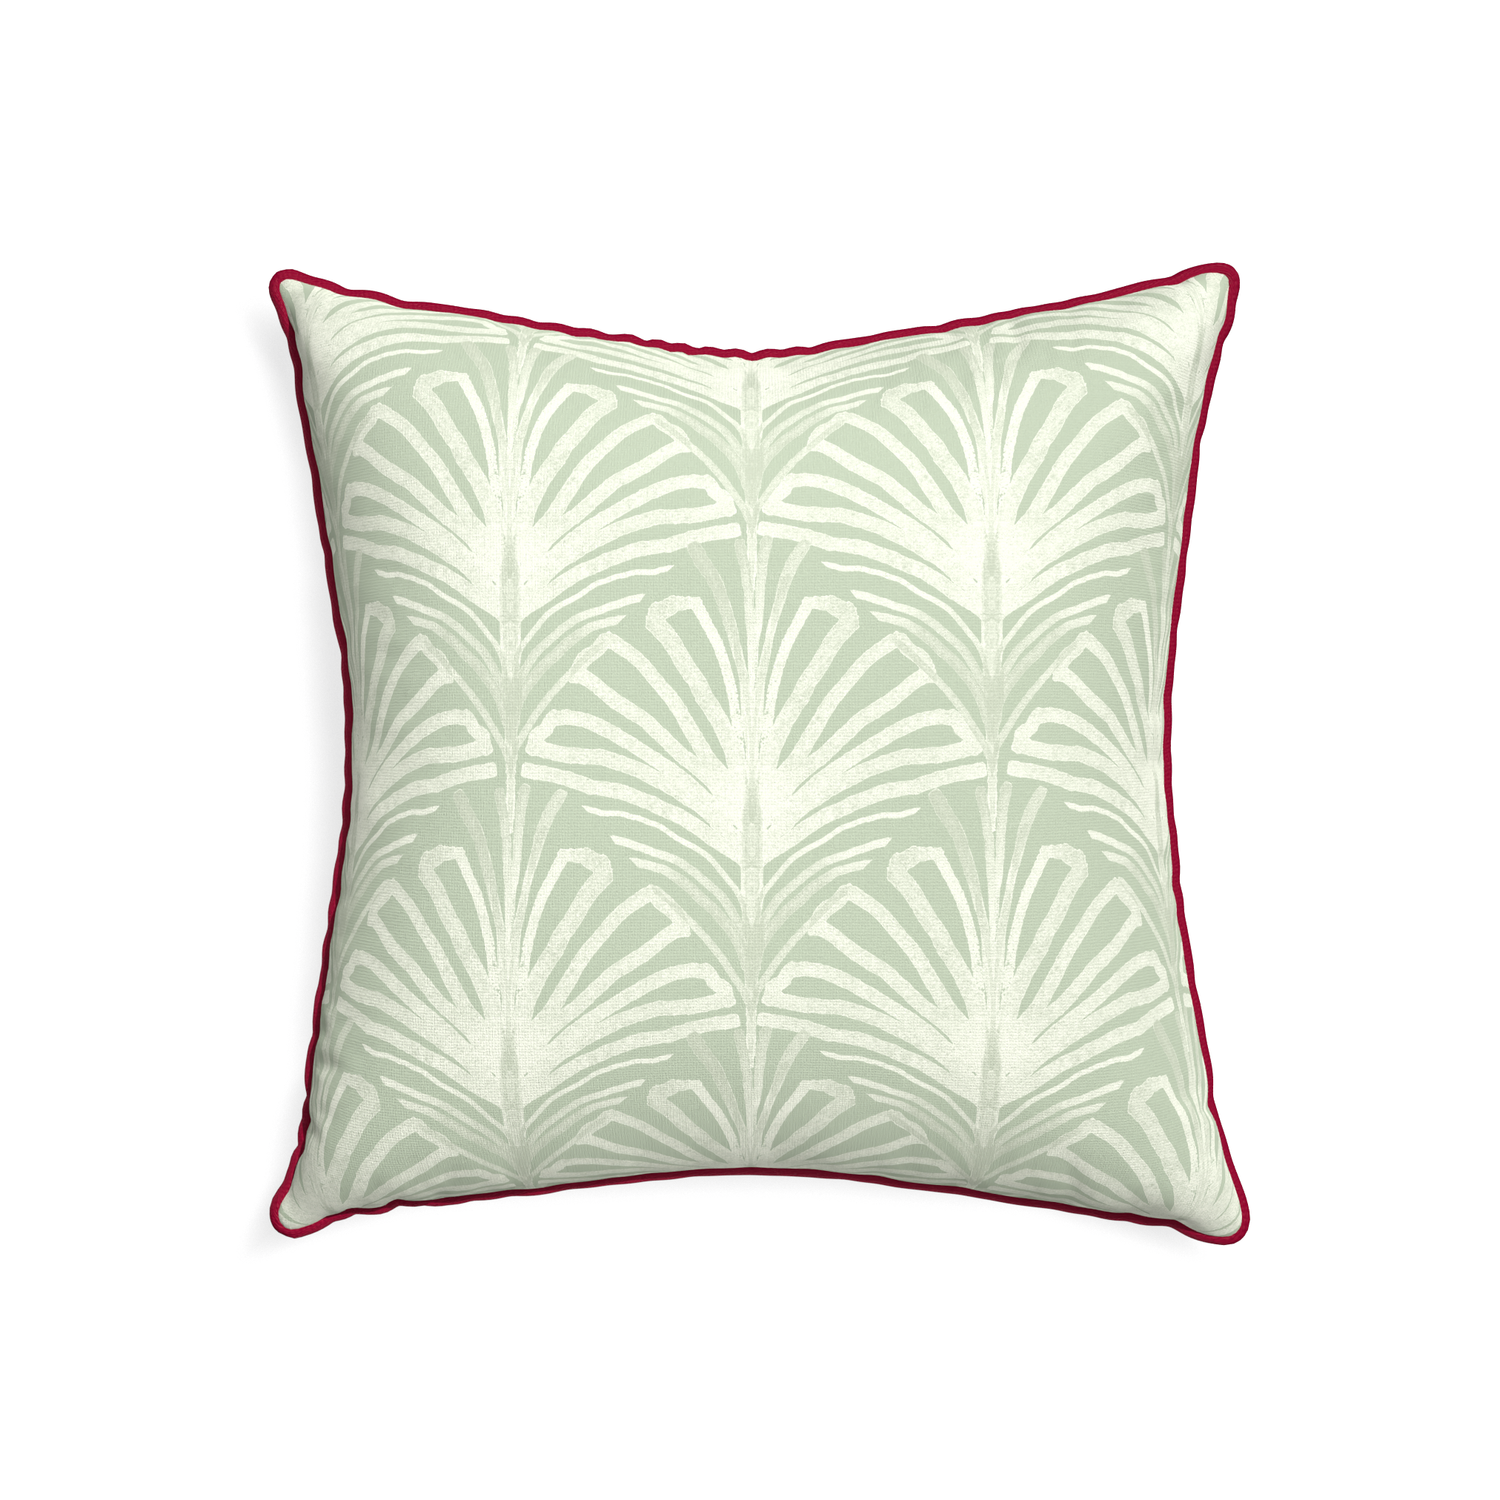 22-square suzy sage custom pillow with raspberry piping on white background